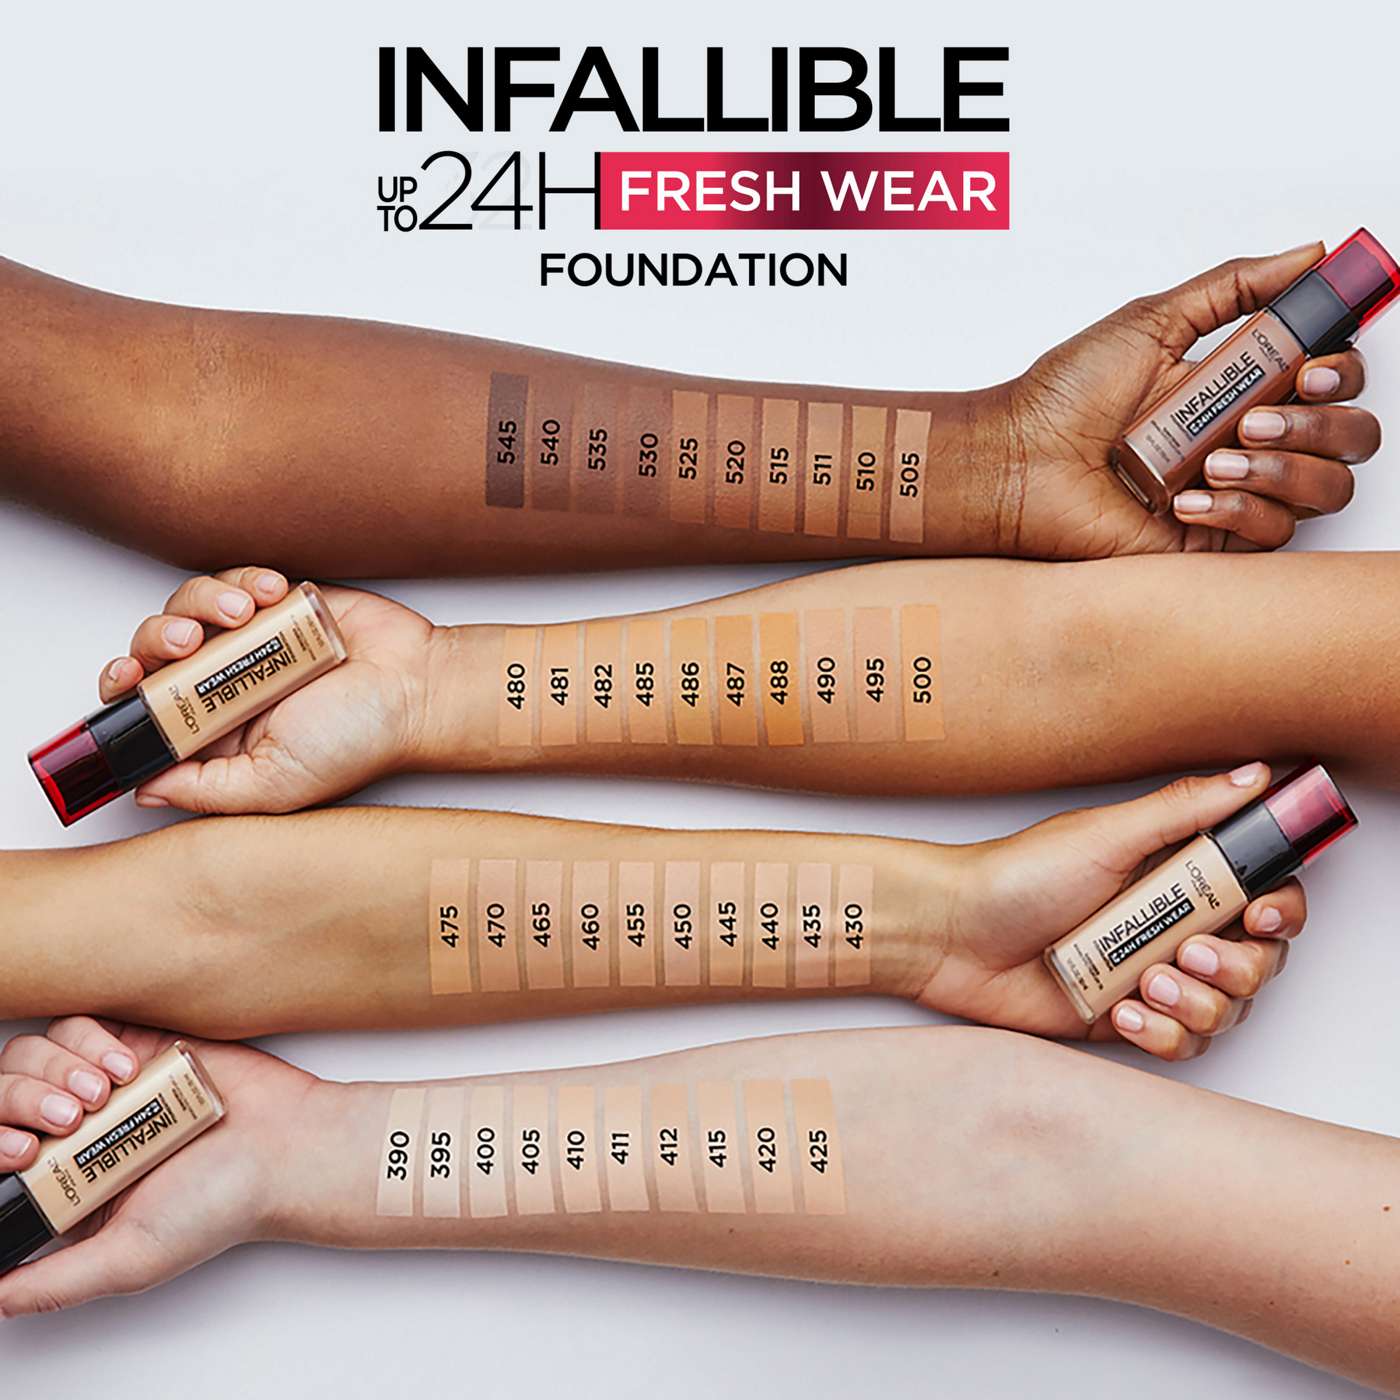 L'Oréal Paris Infallible Up to 24 Hour Fresh Wear Foundation - Lightweight Natural Rose; image 7 of 7